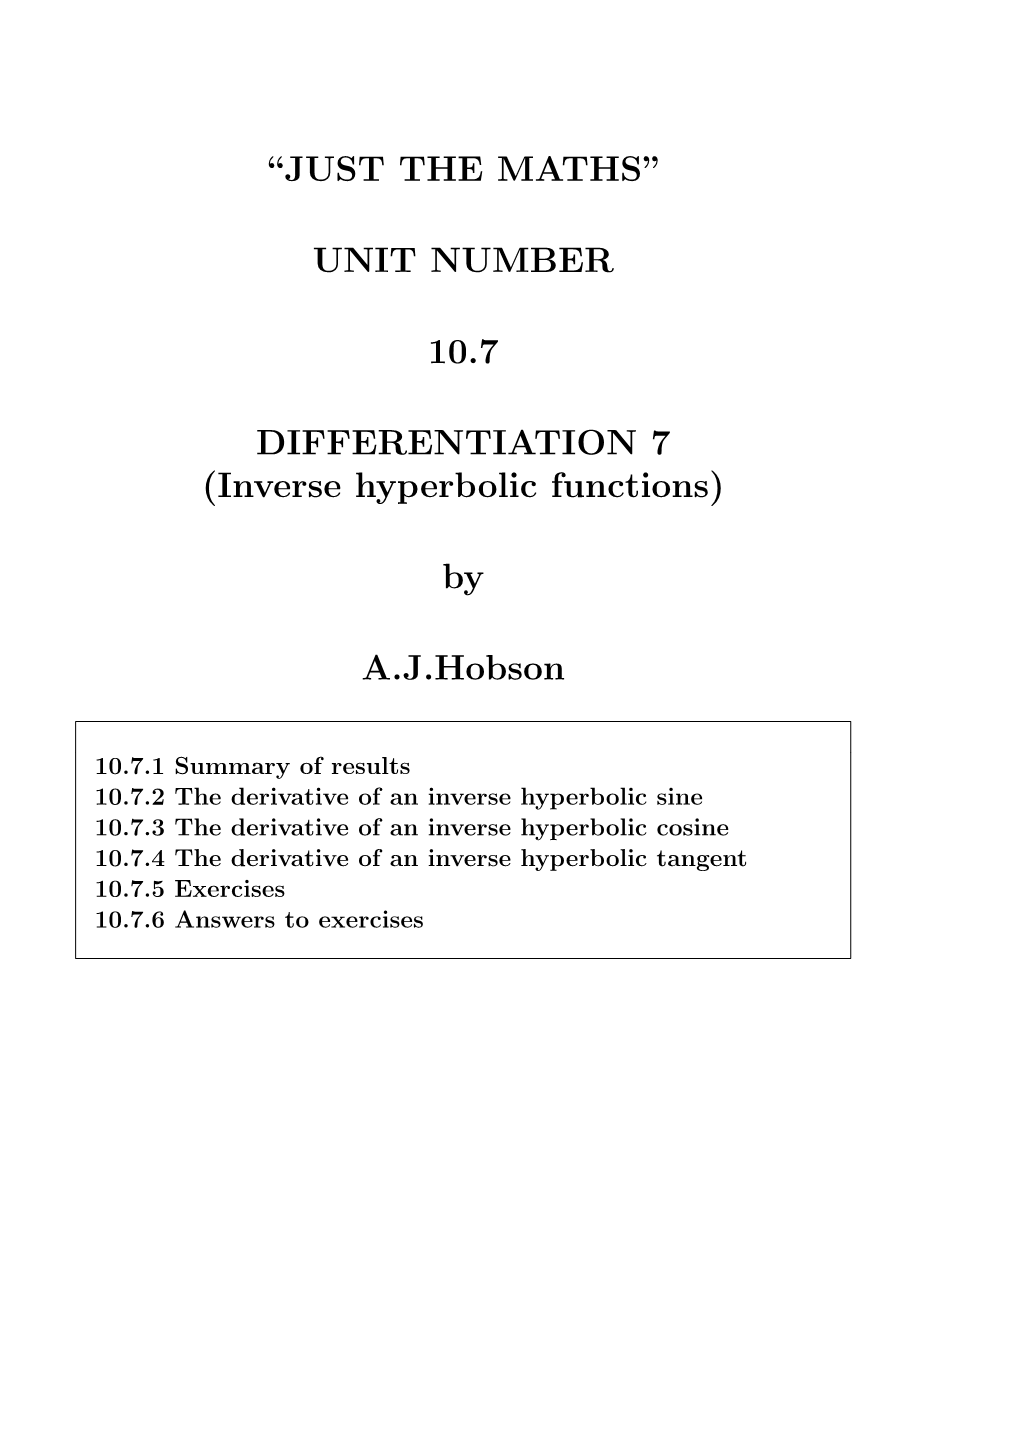 (Inverse Hyperbolic Functions) by Ajhobson